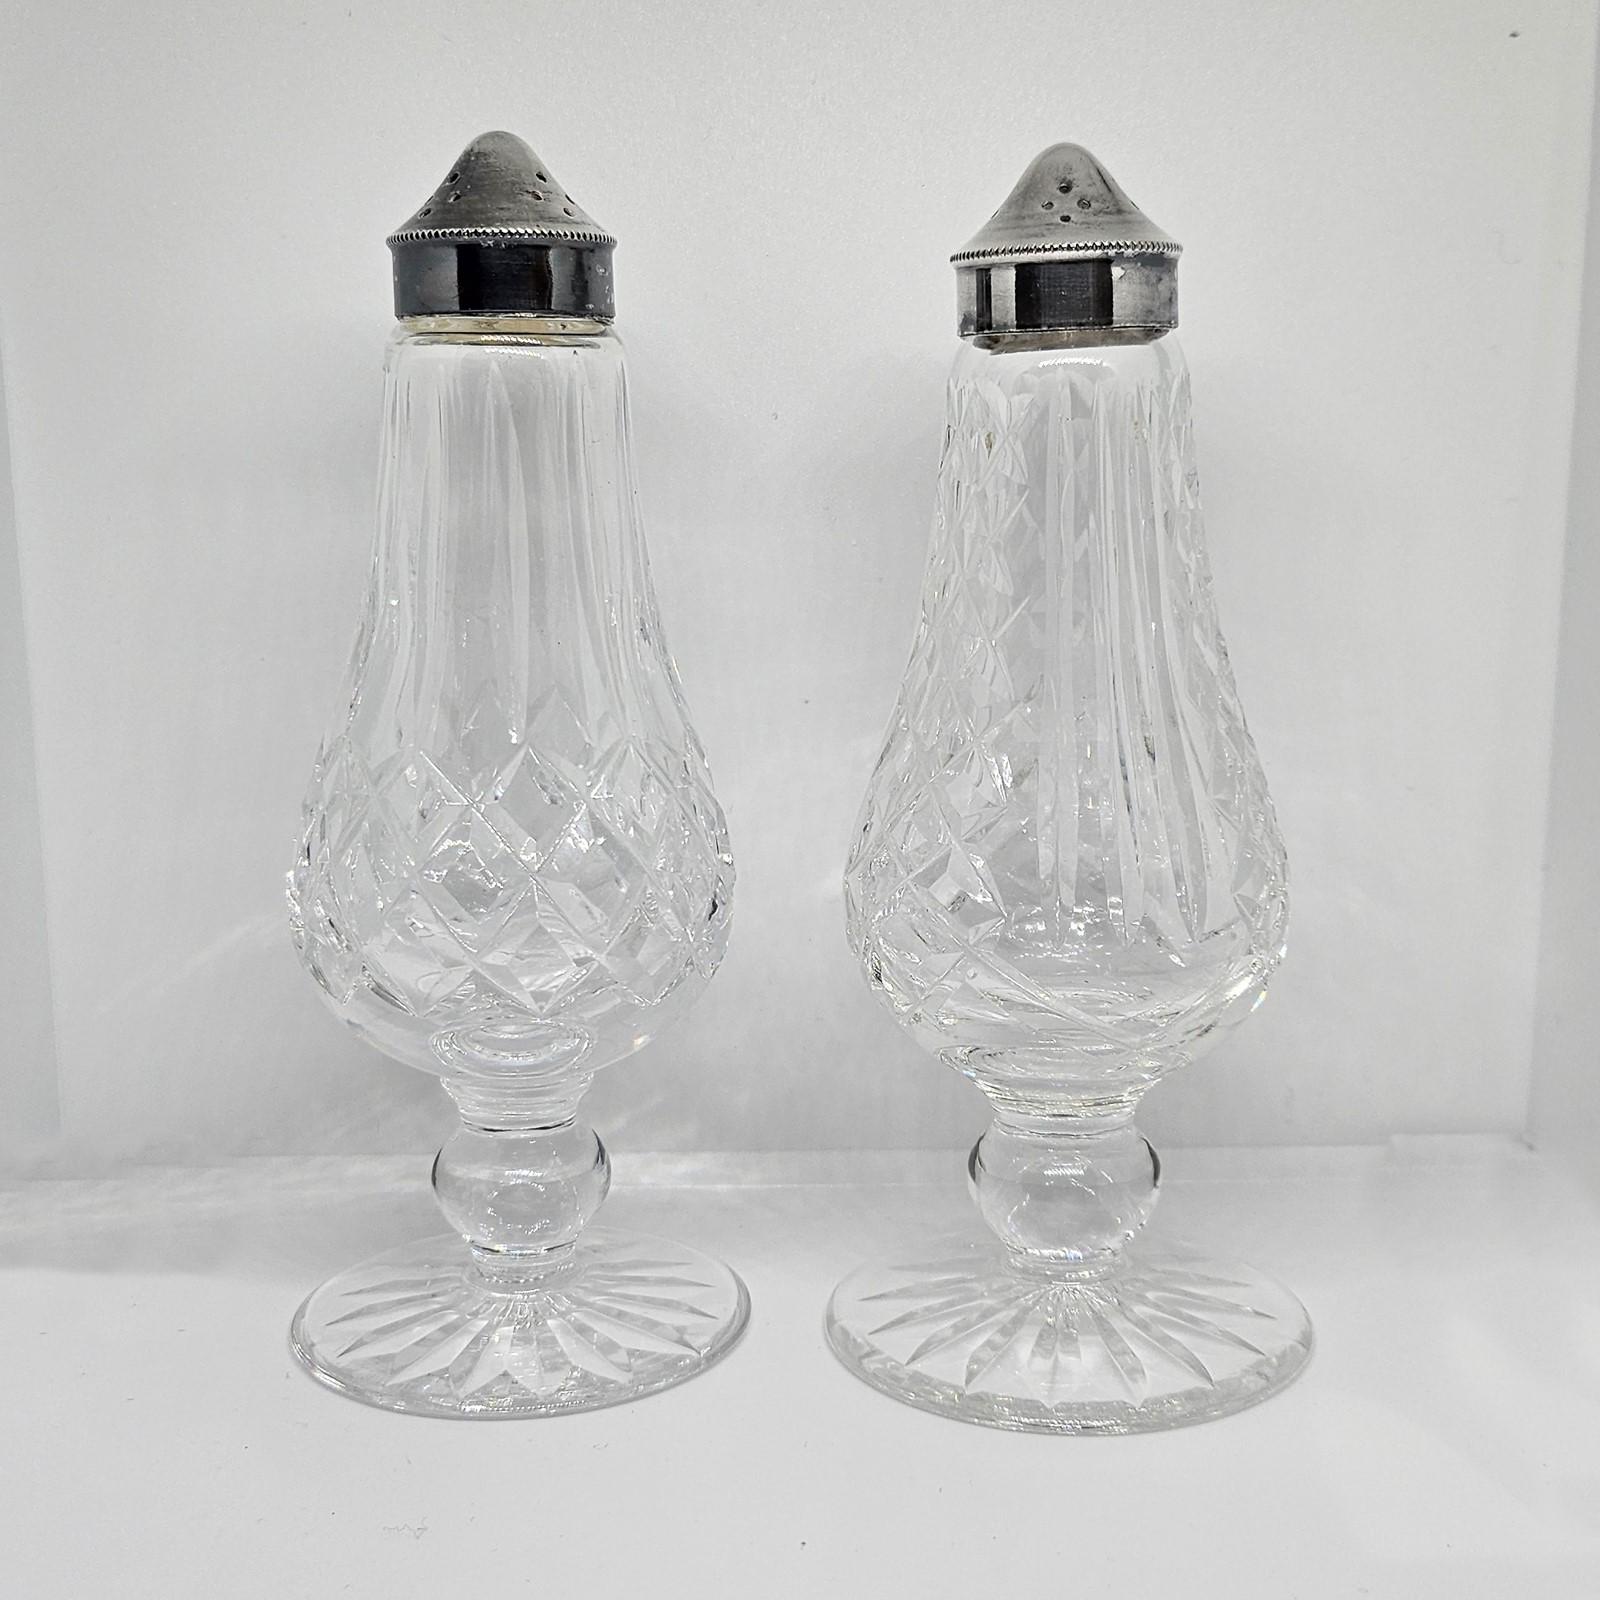 waterford crystal salt and pepper shakers